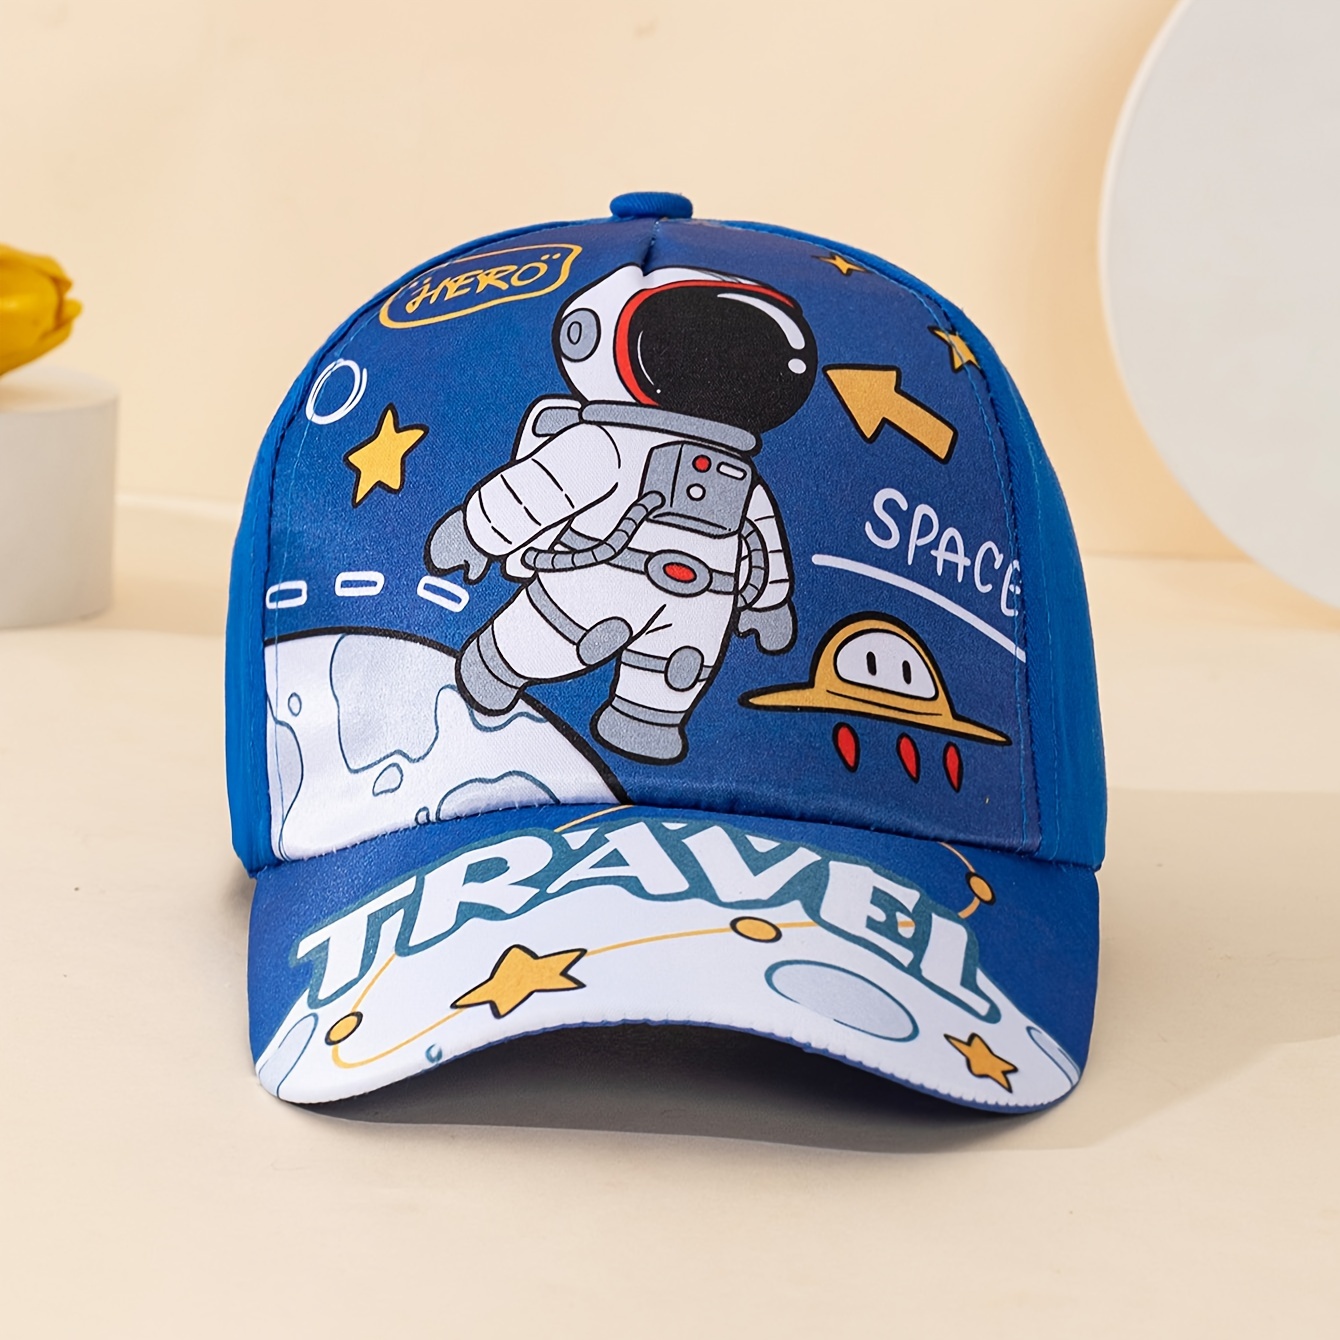 

1pc Cute, Cool And Breathable Blue Baseball Cap For Boys And Girls With Astronaut Print For All Seasons, Cap Suitable For Daily Wear, Outdoor Play, Children's Day Gift